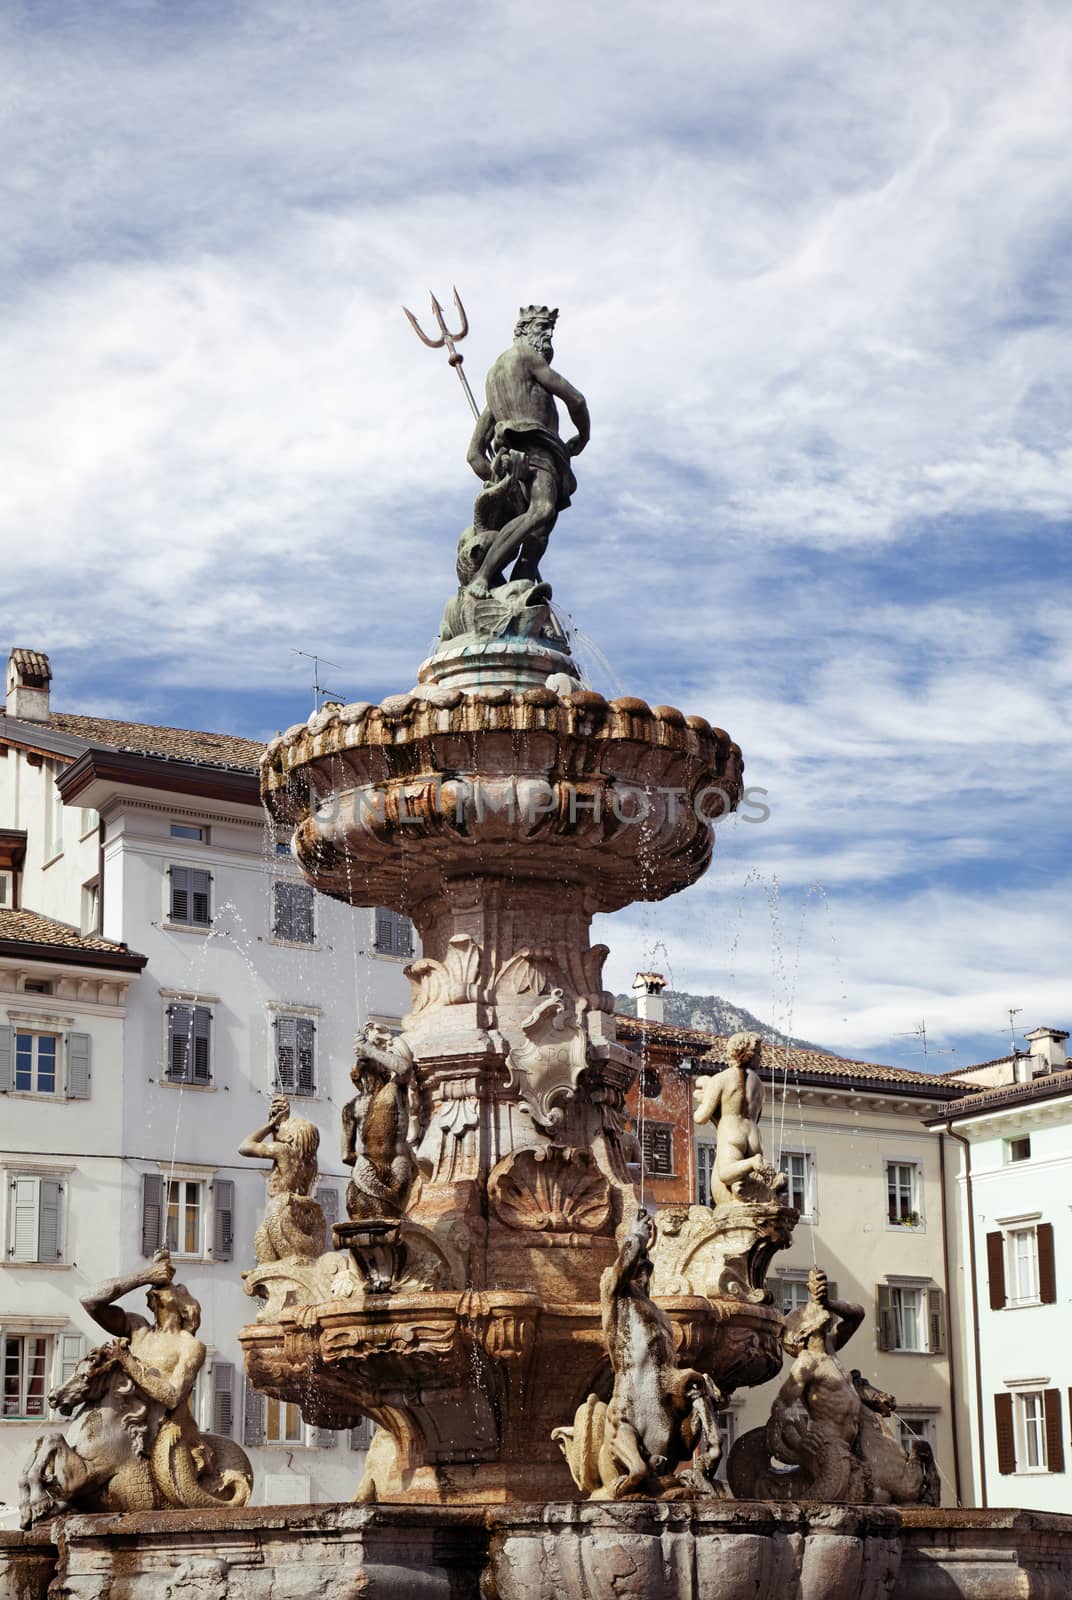 Fountain of Neptune on the Piazza Duomo in Trento, Italy